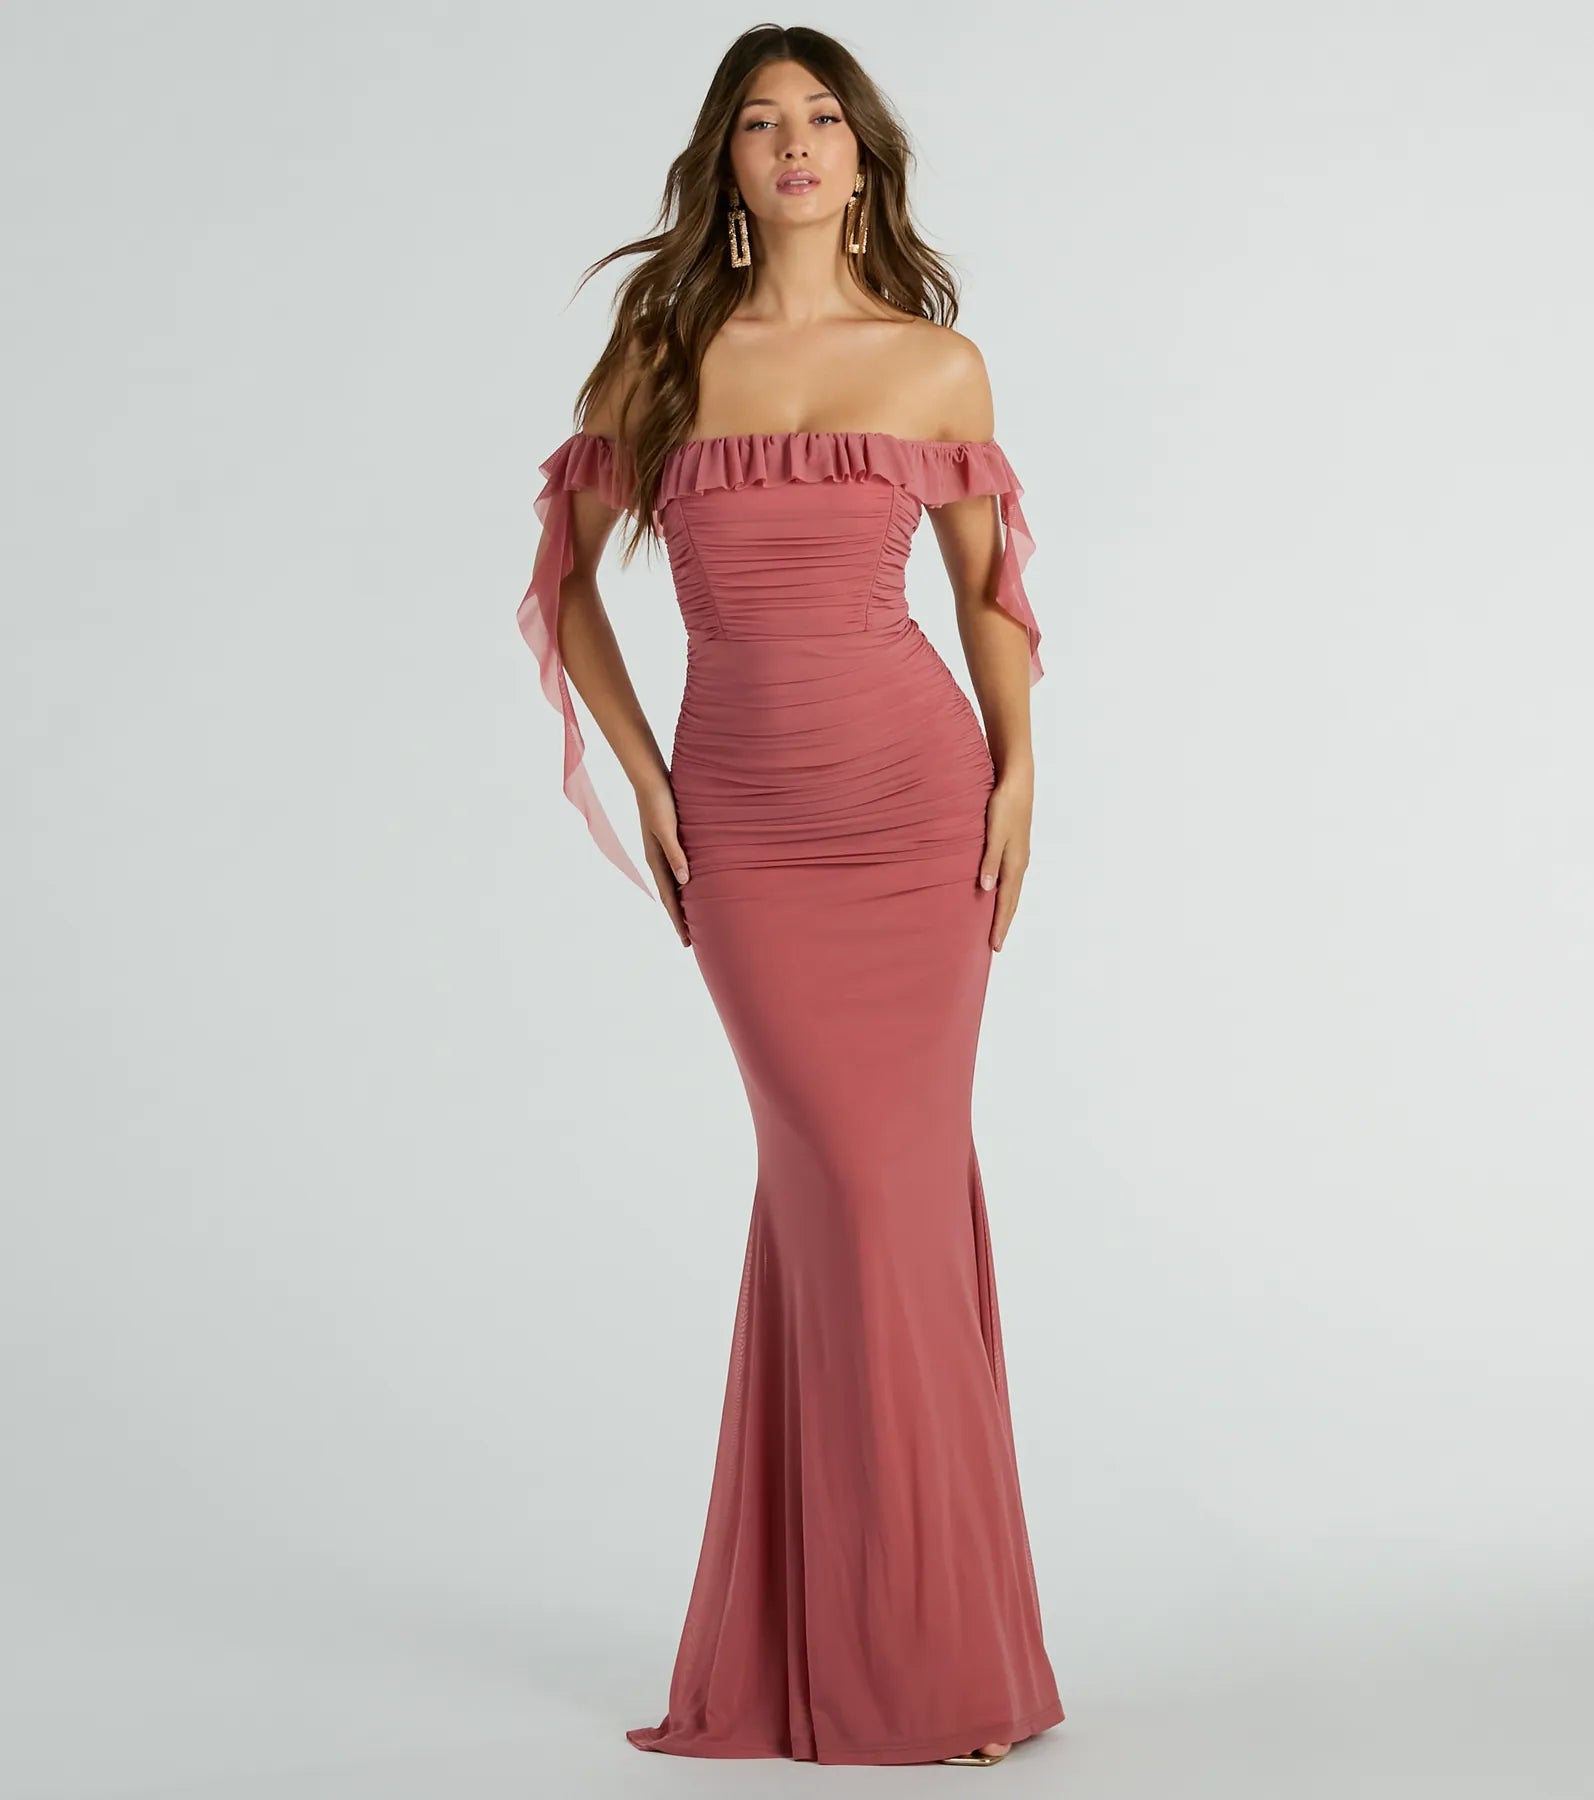 Sexy Sophisticated Off the Shoulder Mesh Stretchy Ruched Mermaid Knit Maxi Dress With Ruffles